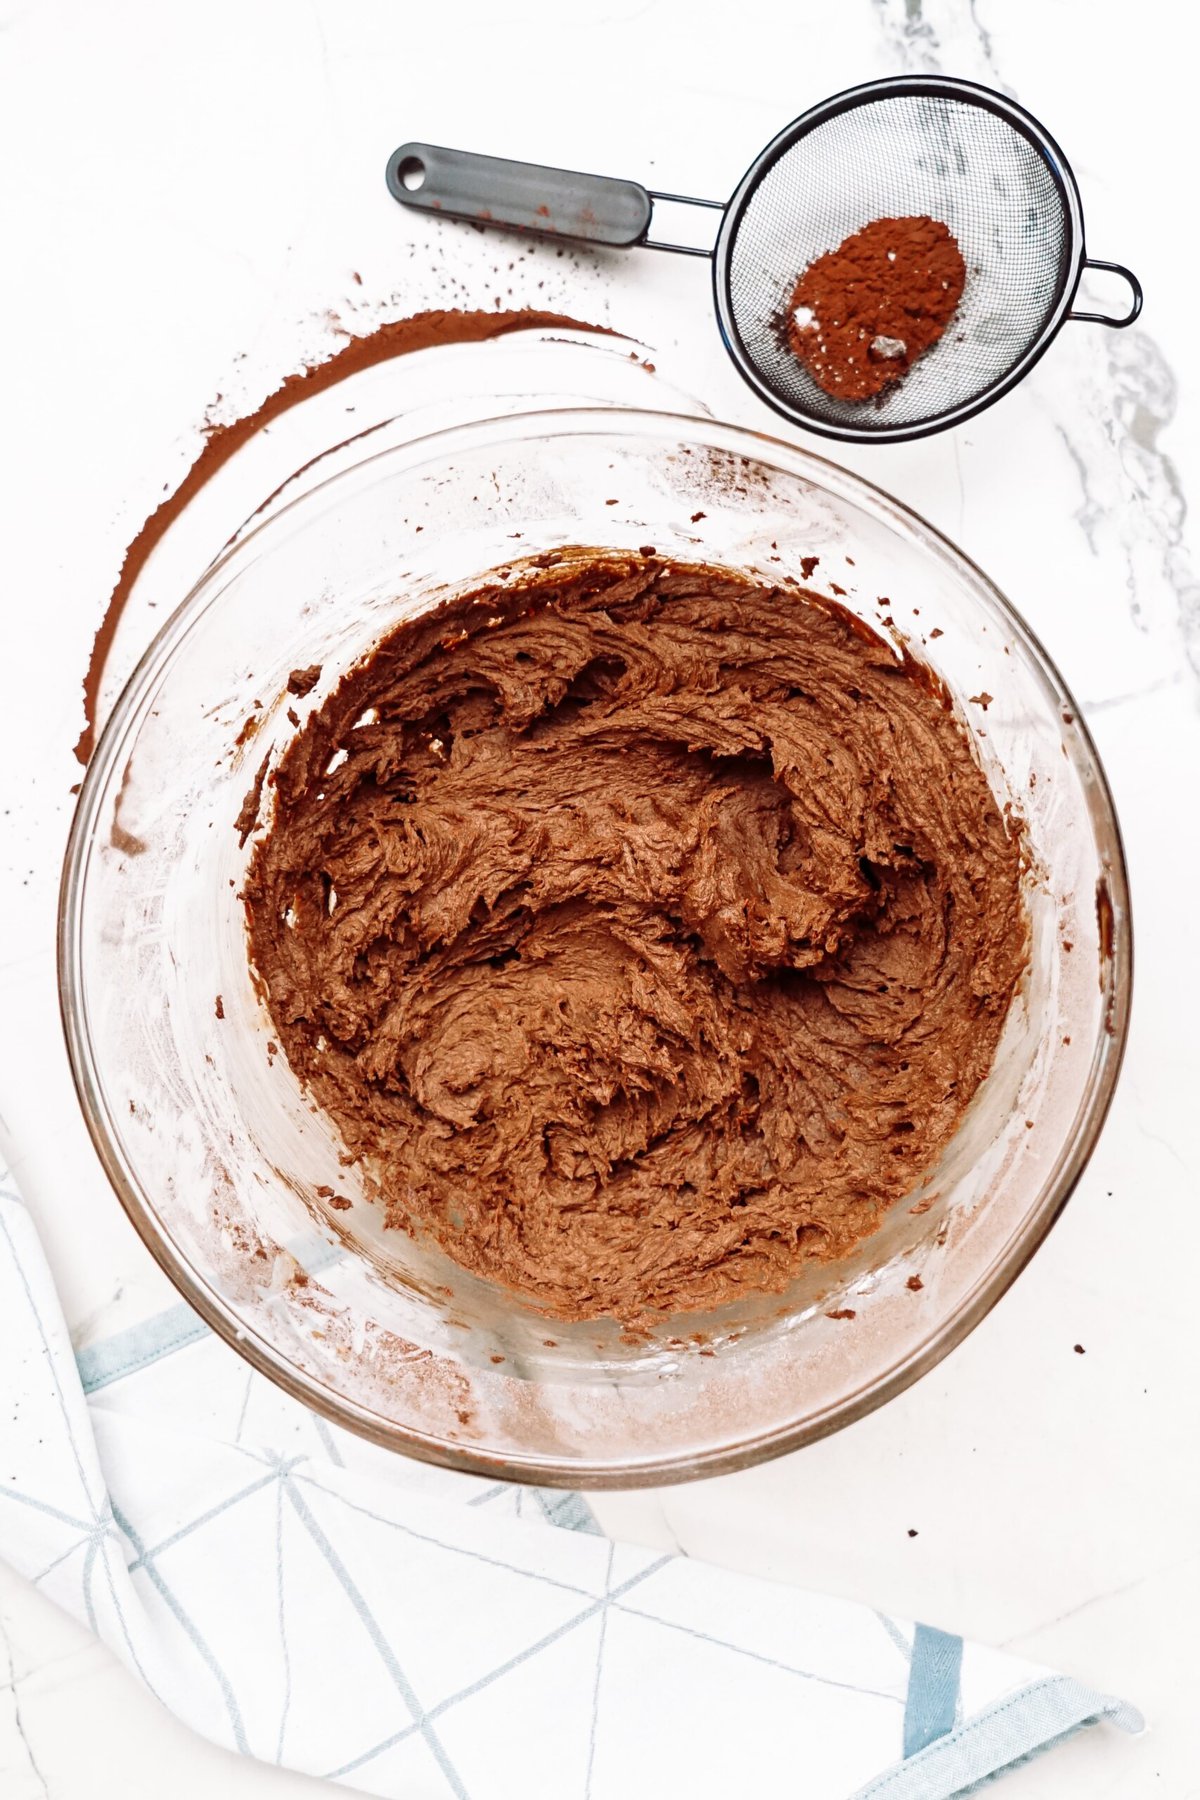 Bowl of chocolate frosting with spilled cocoa powder and sieve on a marble countertop.